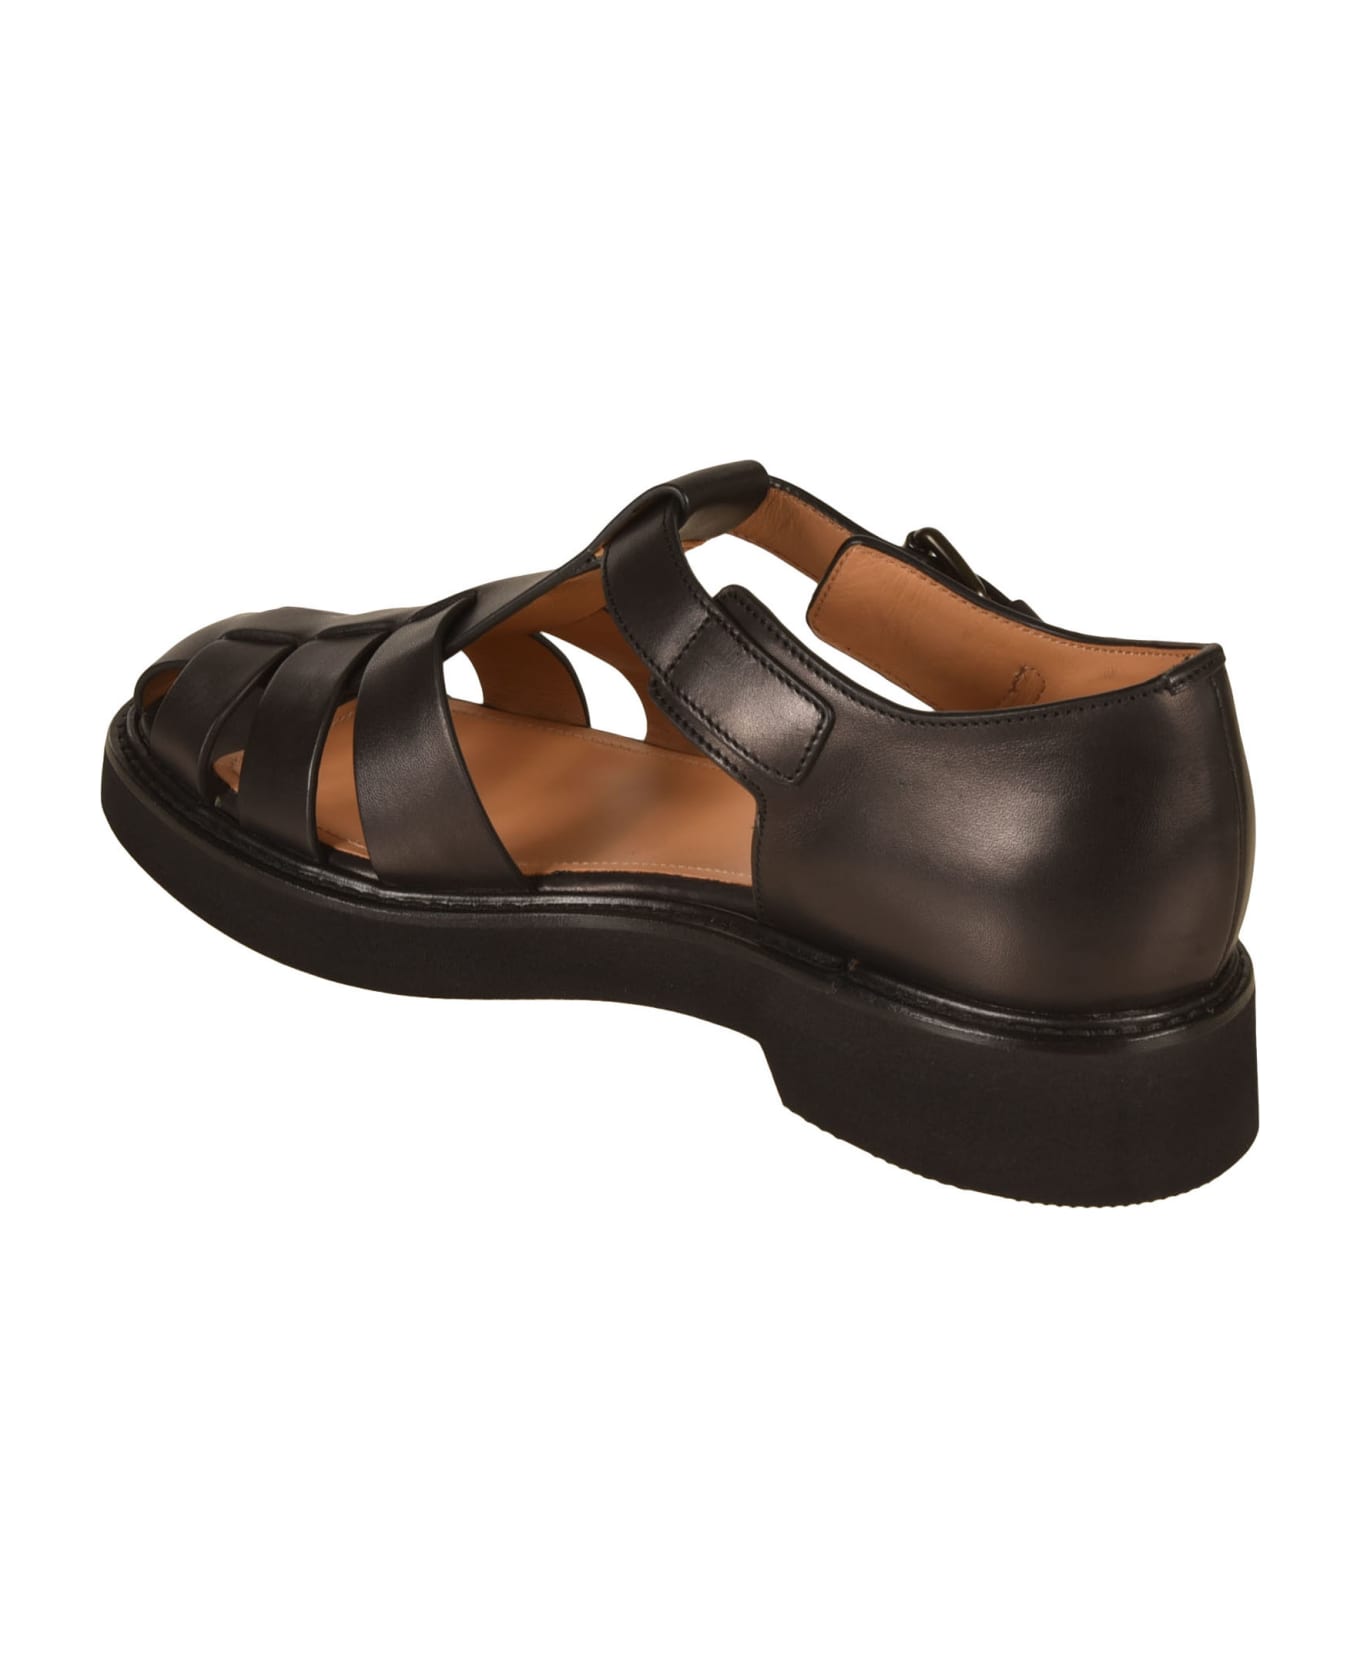 Church's Hove Leather Sandals - Black